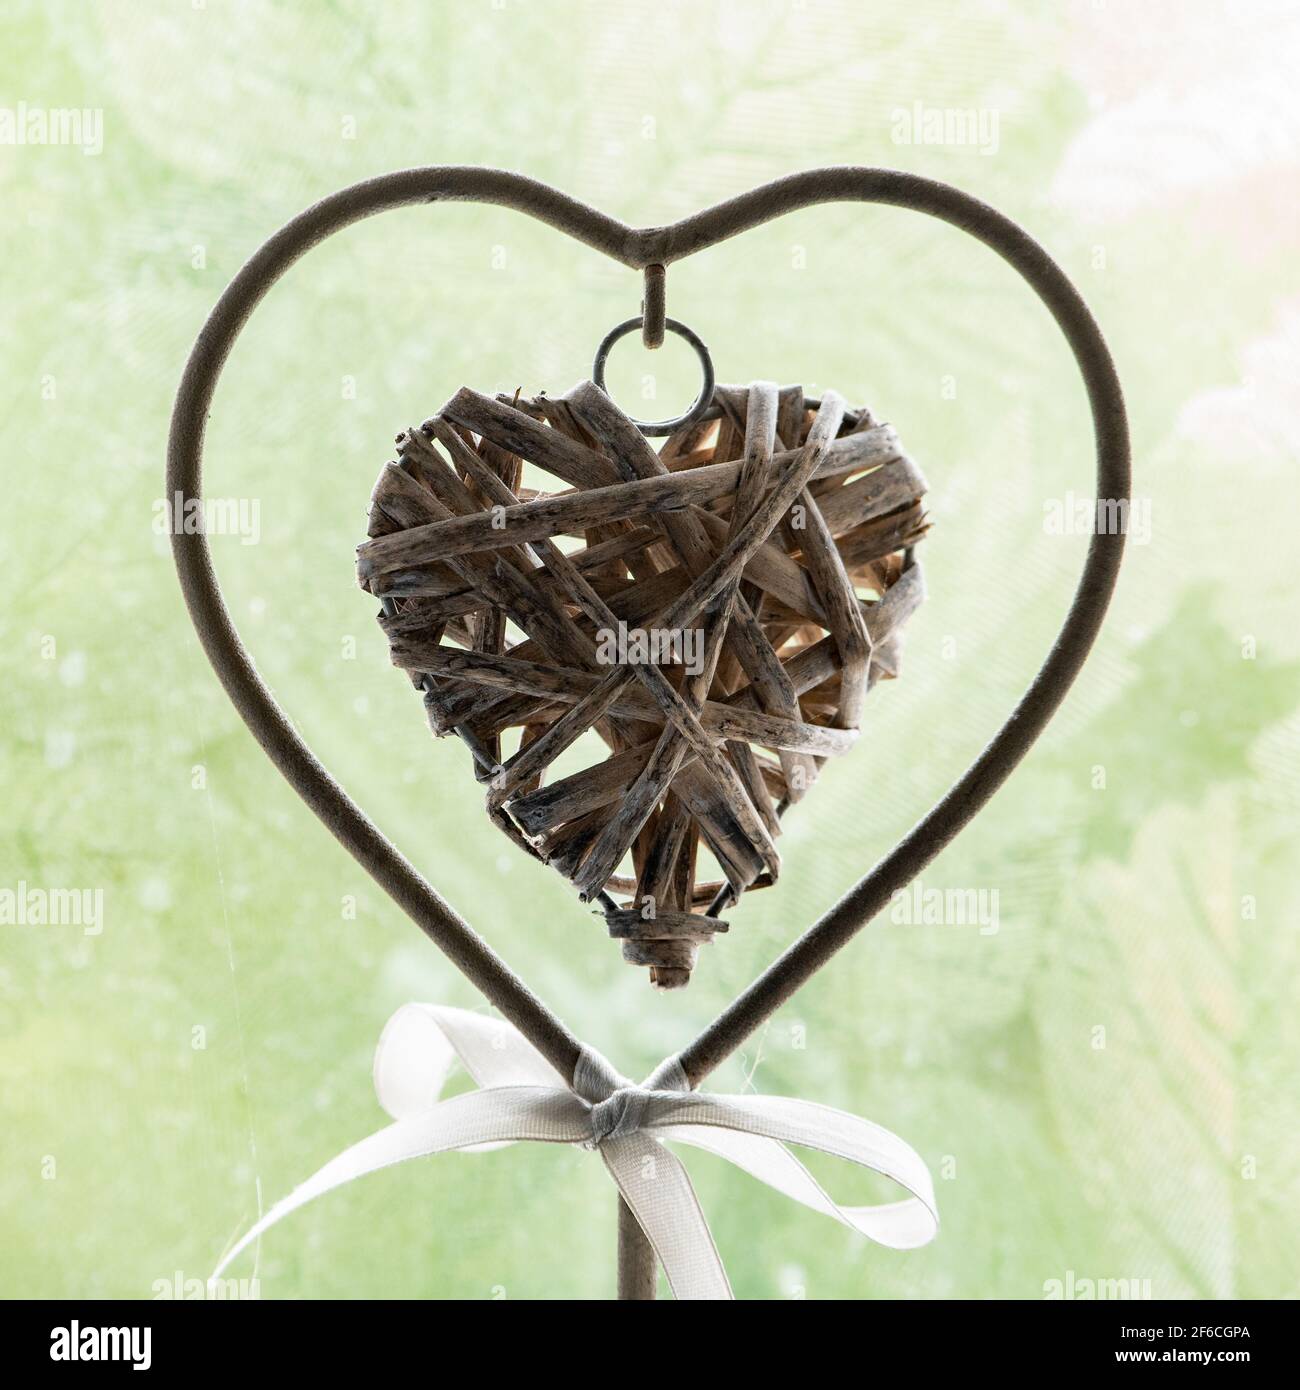 A wicker heart within a heart against frosted glass in front of a green background. Stock Photo